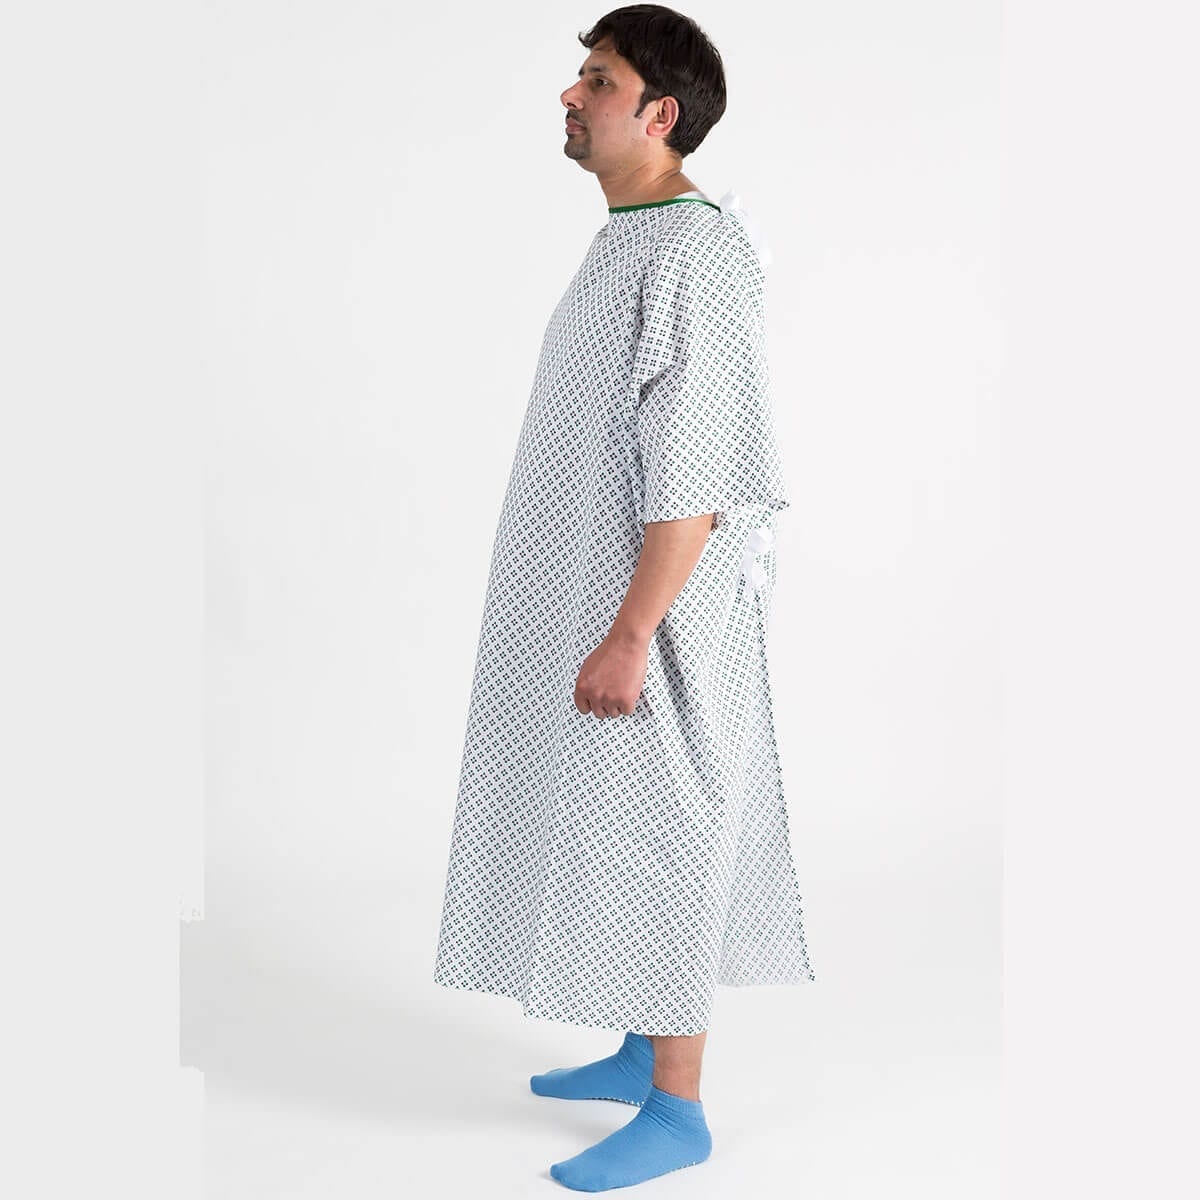 Hospital bariatric 4XL gown - side view